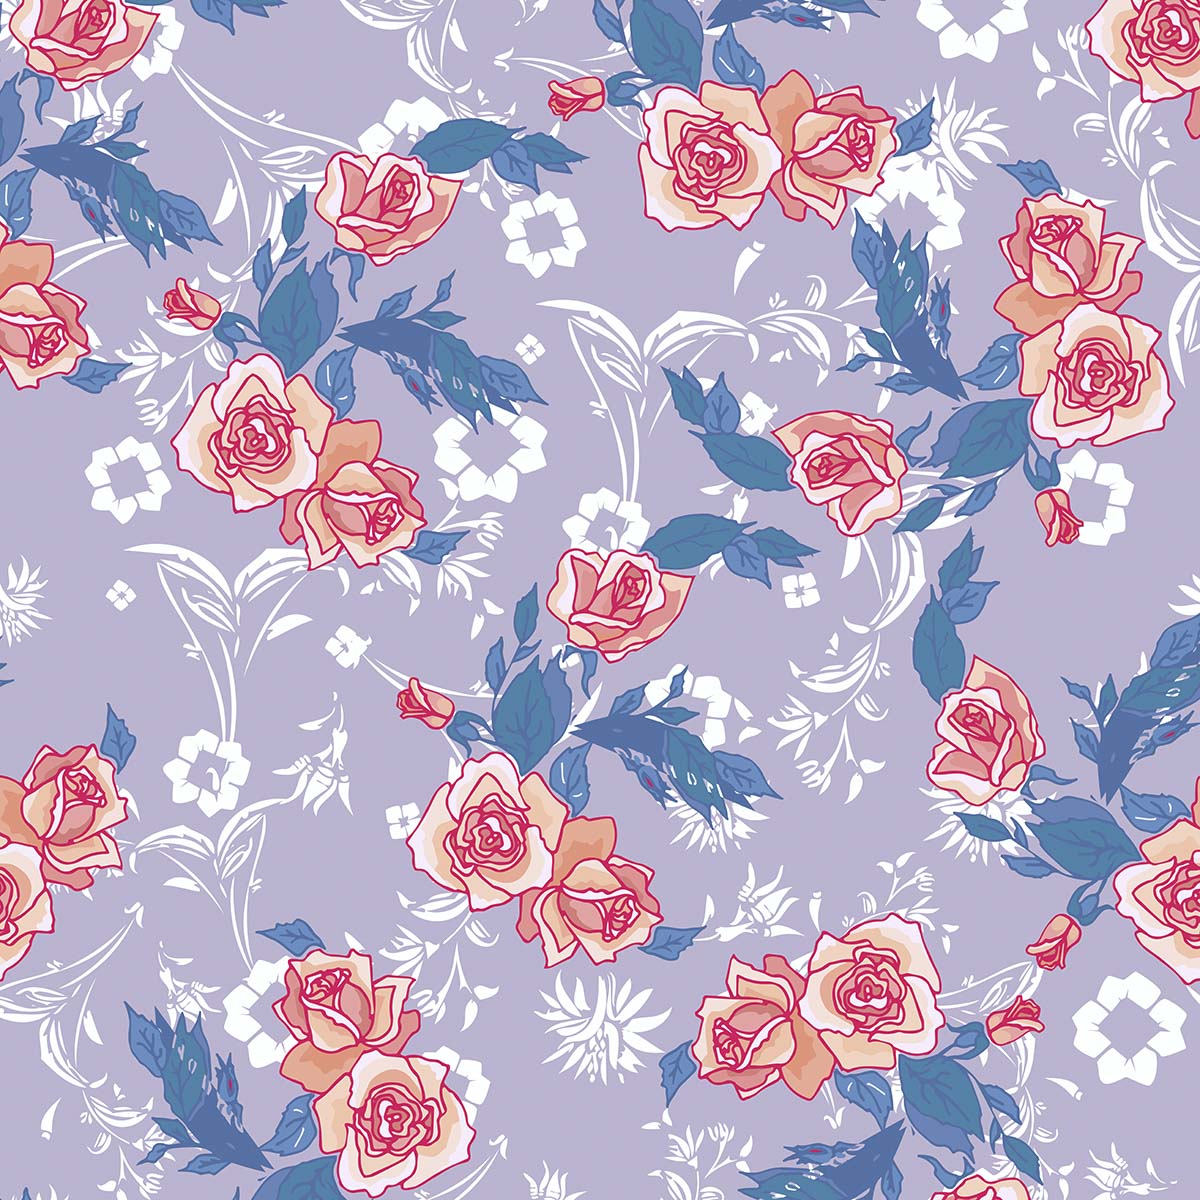 A pattern of flowers on a purple background